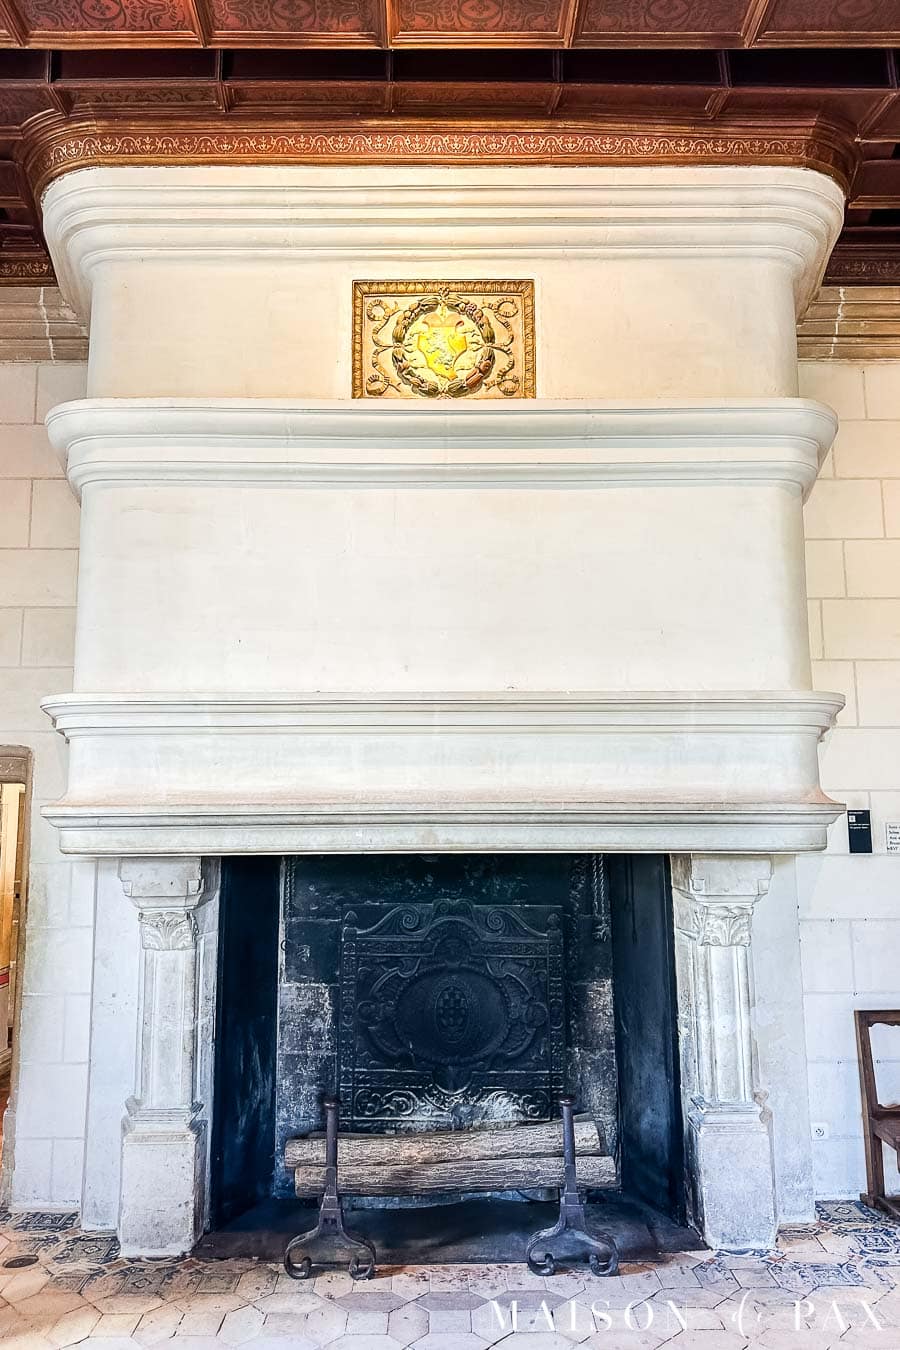 large stone fireplace from Chateau de Chenonceau